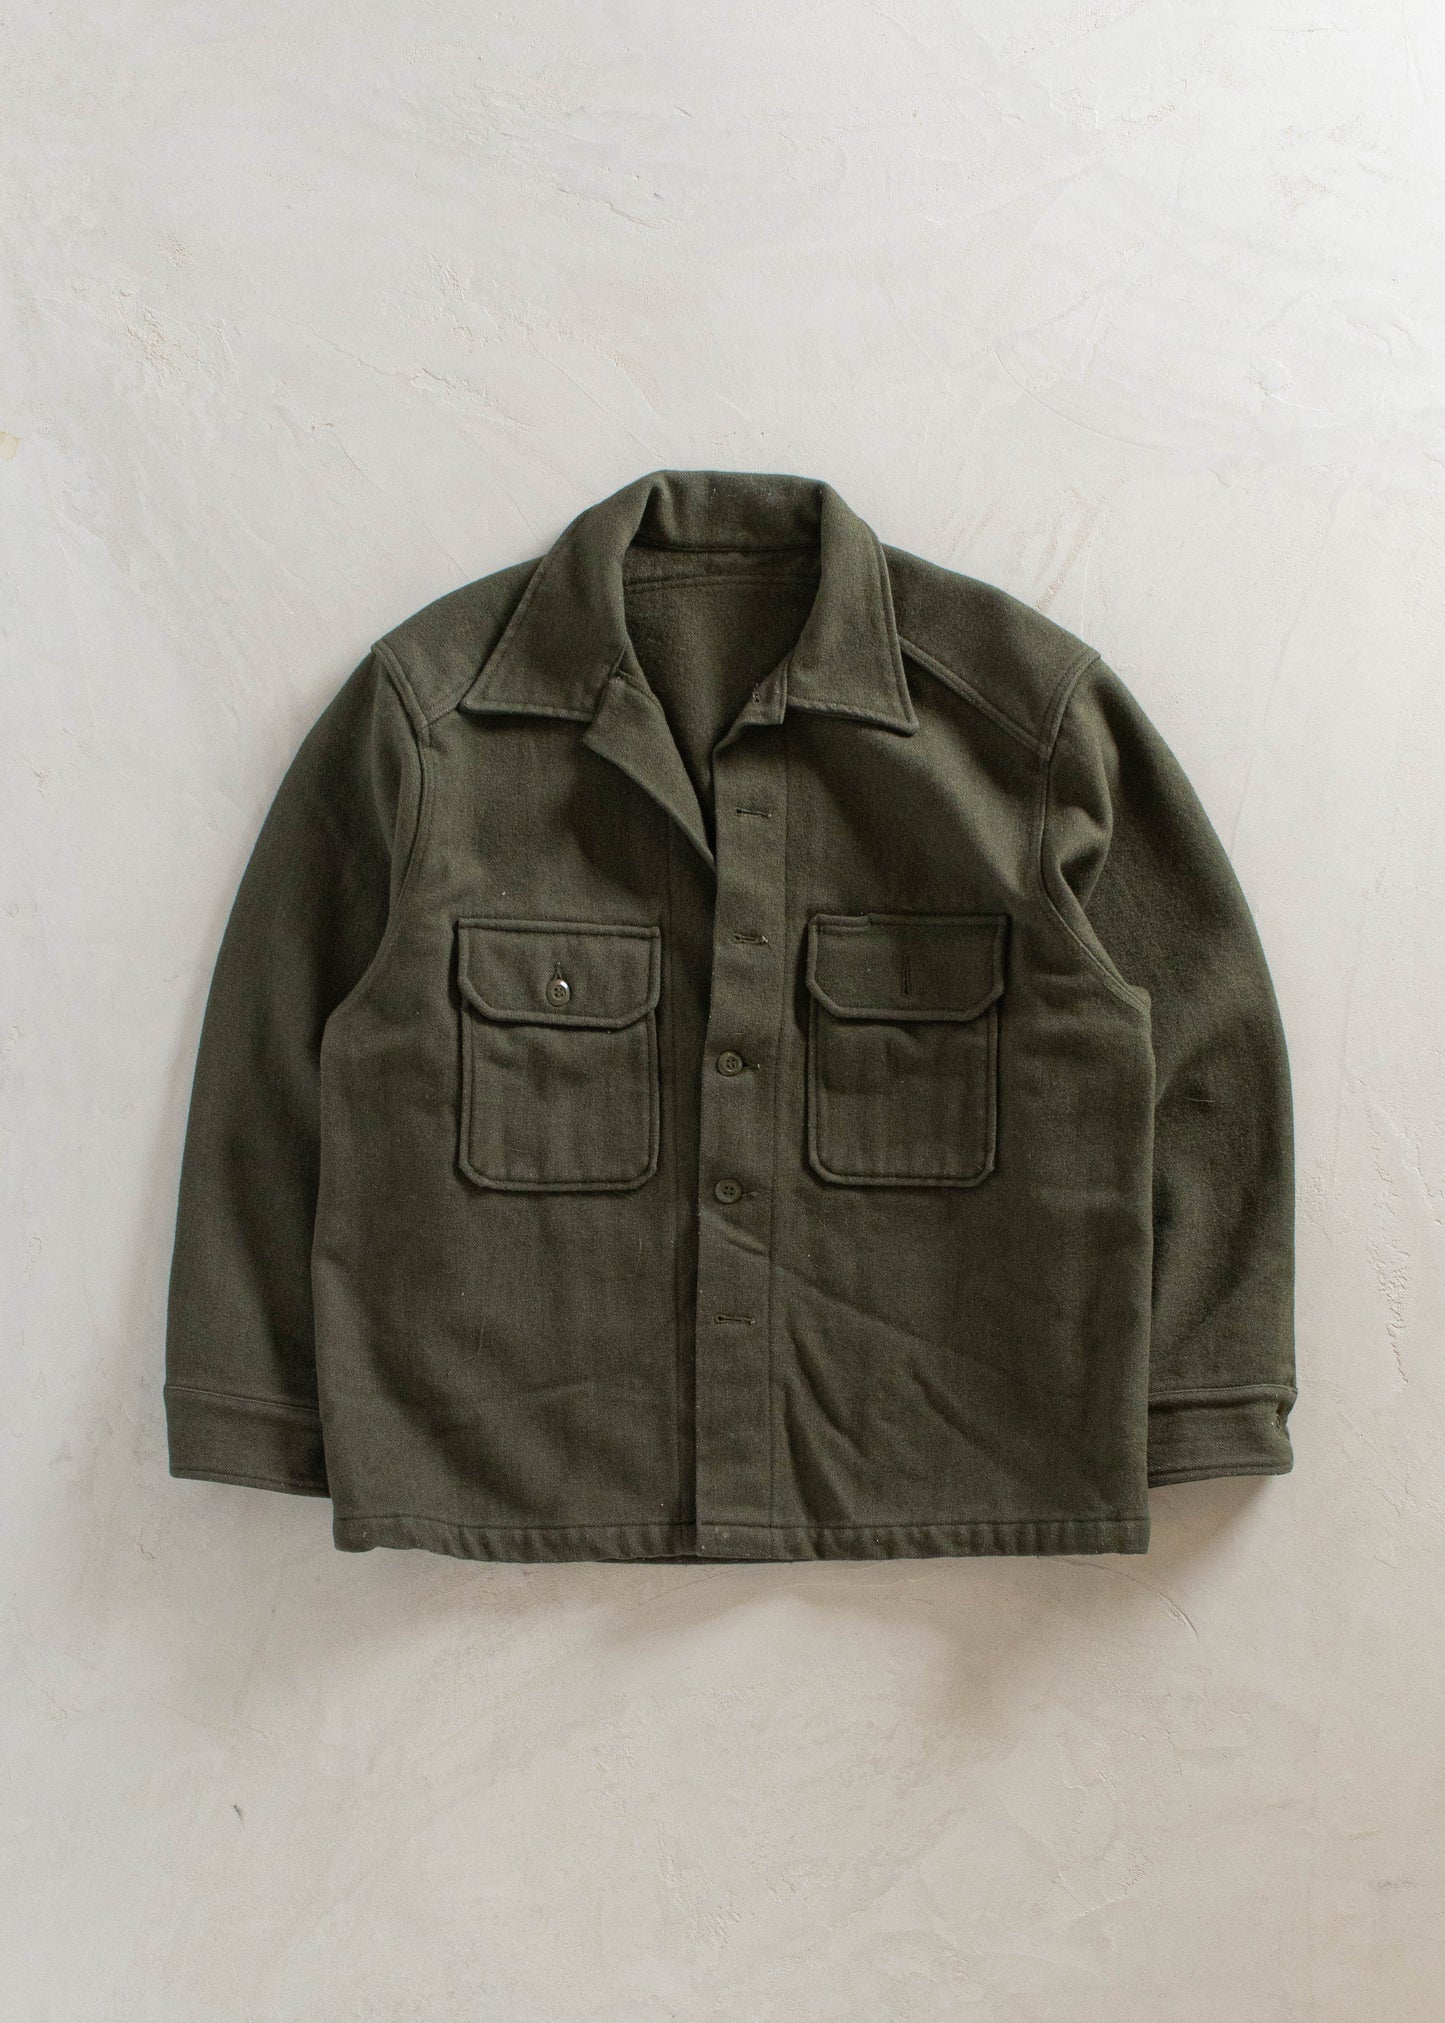 1980s Military Wool Button Up Shirt Size L/XL